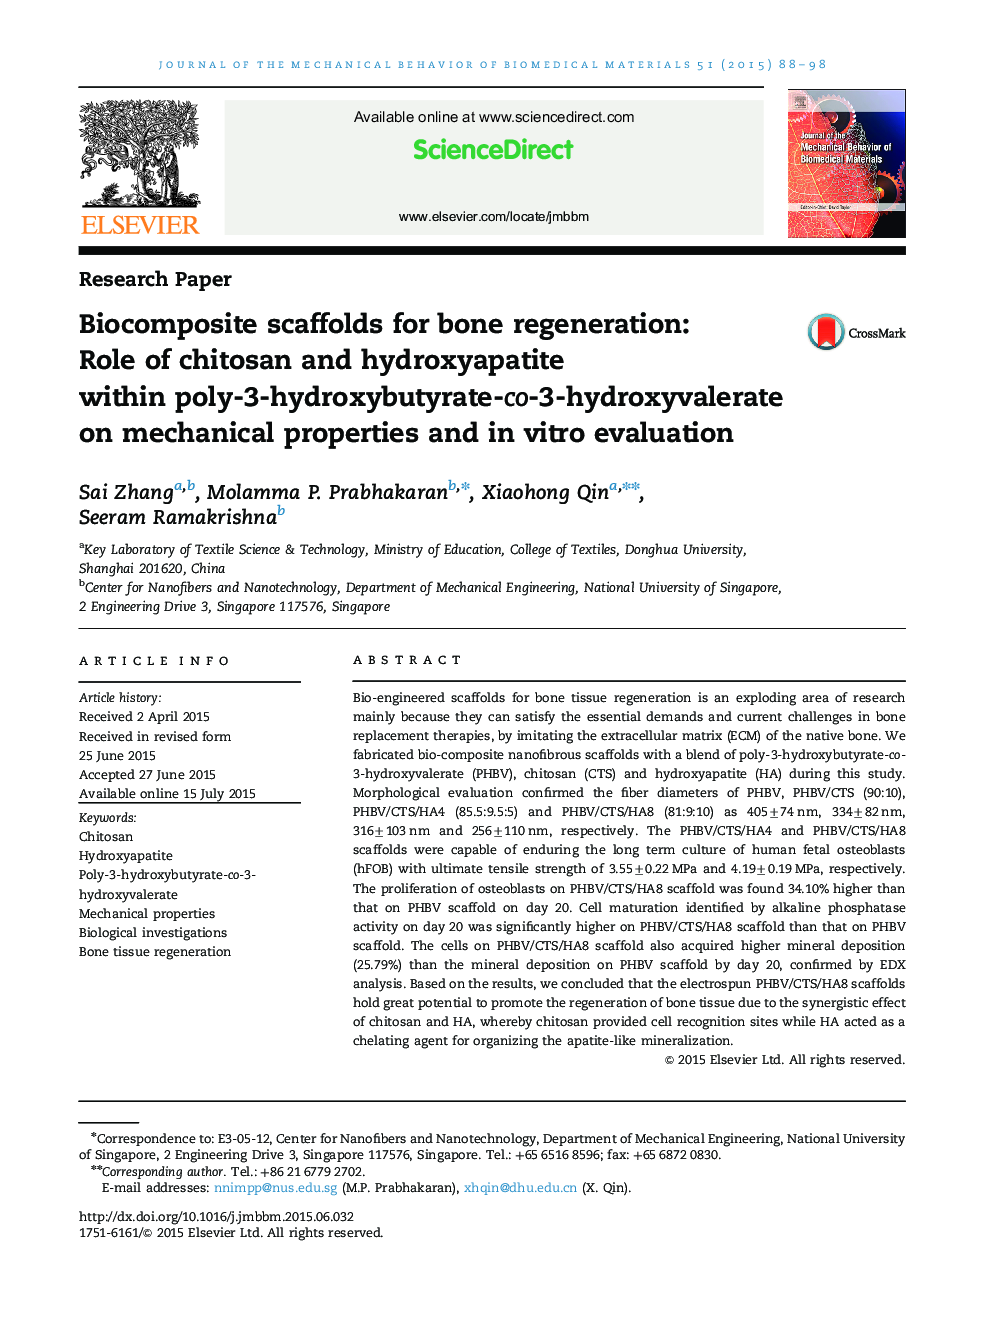 Biocomposite scaffolds for bone regeneration: Role of chitosan and hydroxyapatite within poly-3-hydroxybutyrate-co-3-hydroxyvalerate on mechanical properties and in vitro evaluation